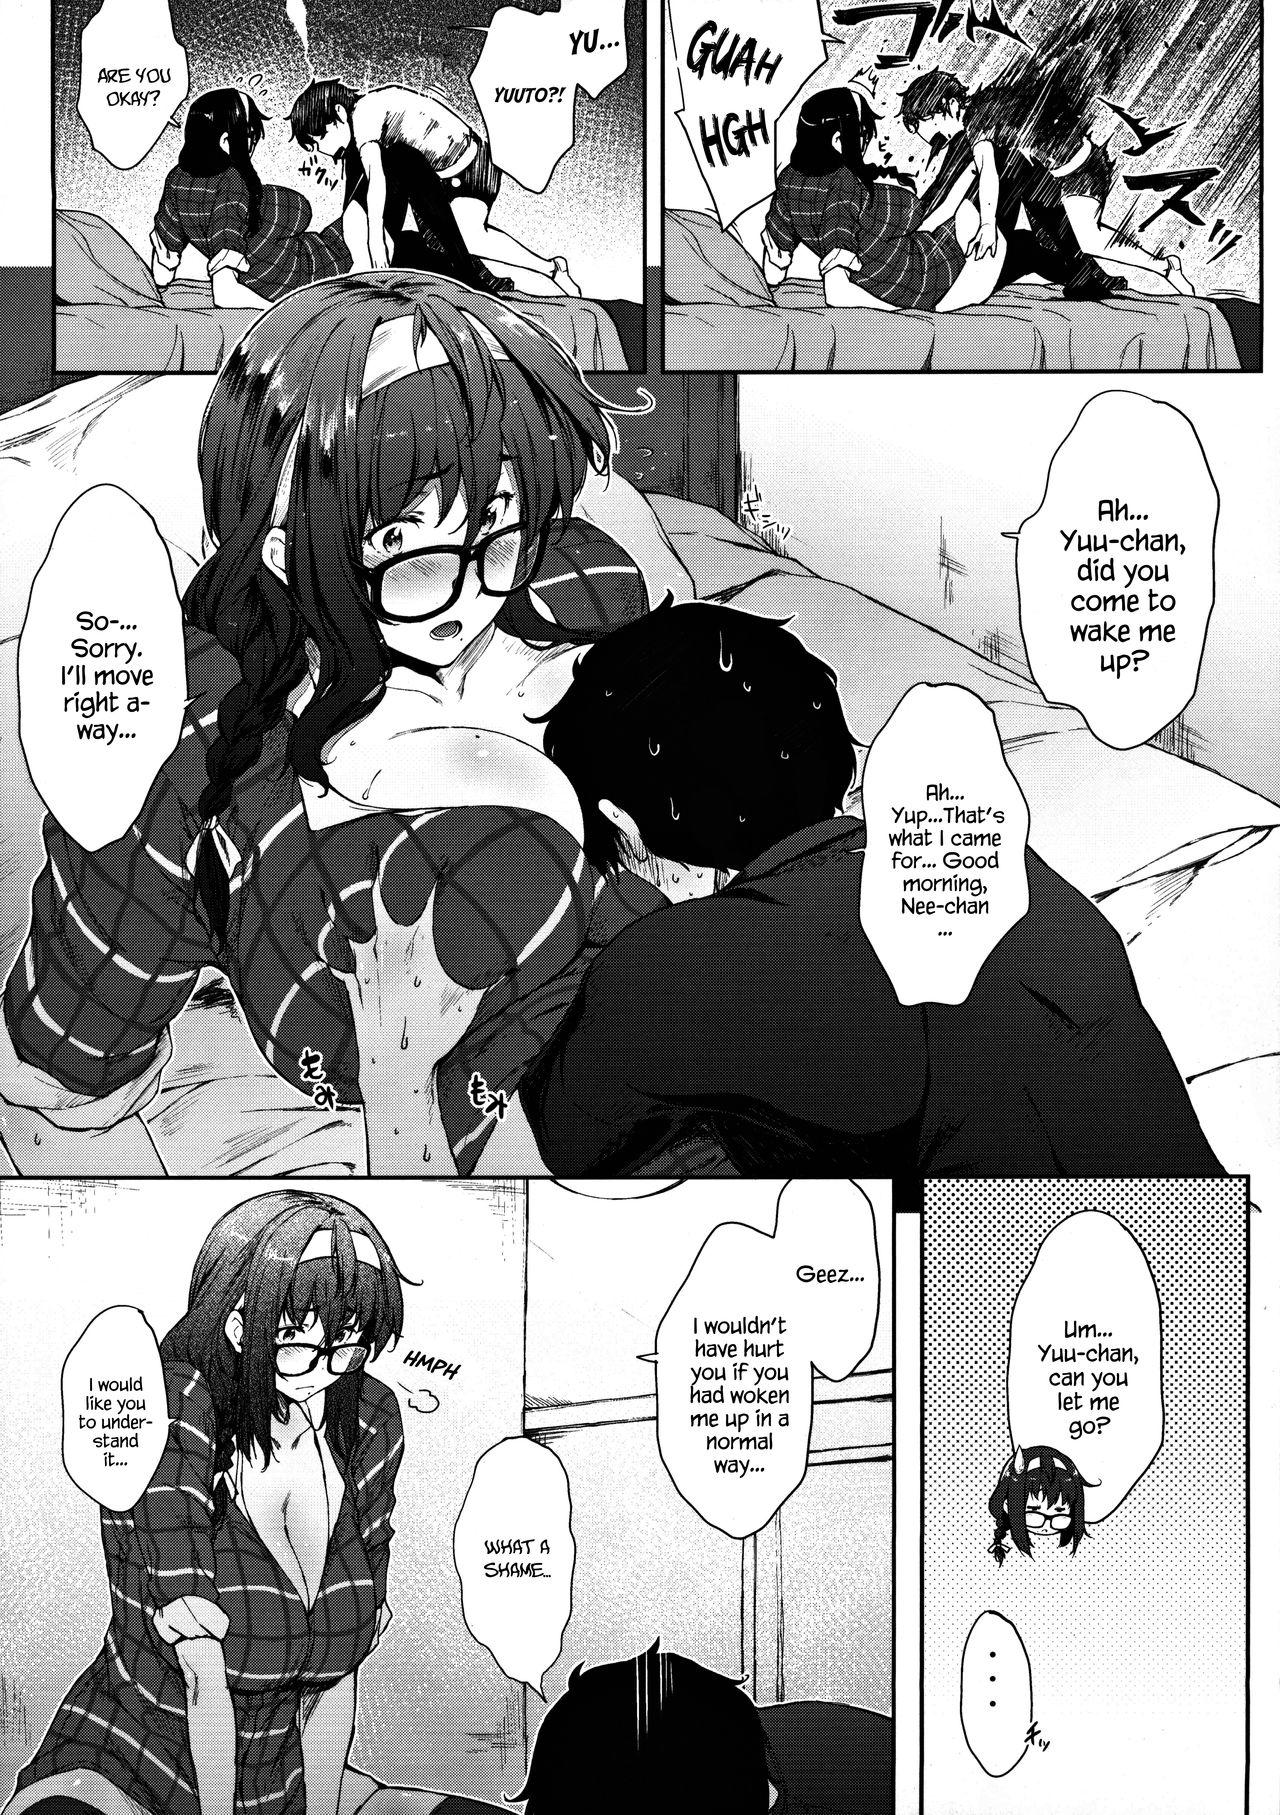 Outdoor Sex Babaa no Inu Ma ni Nee-chan to | With My Stepsister While My Mom's Not Home - Original Stepson - Page 5